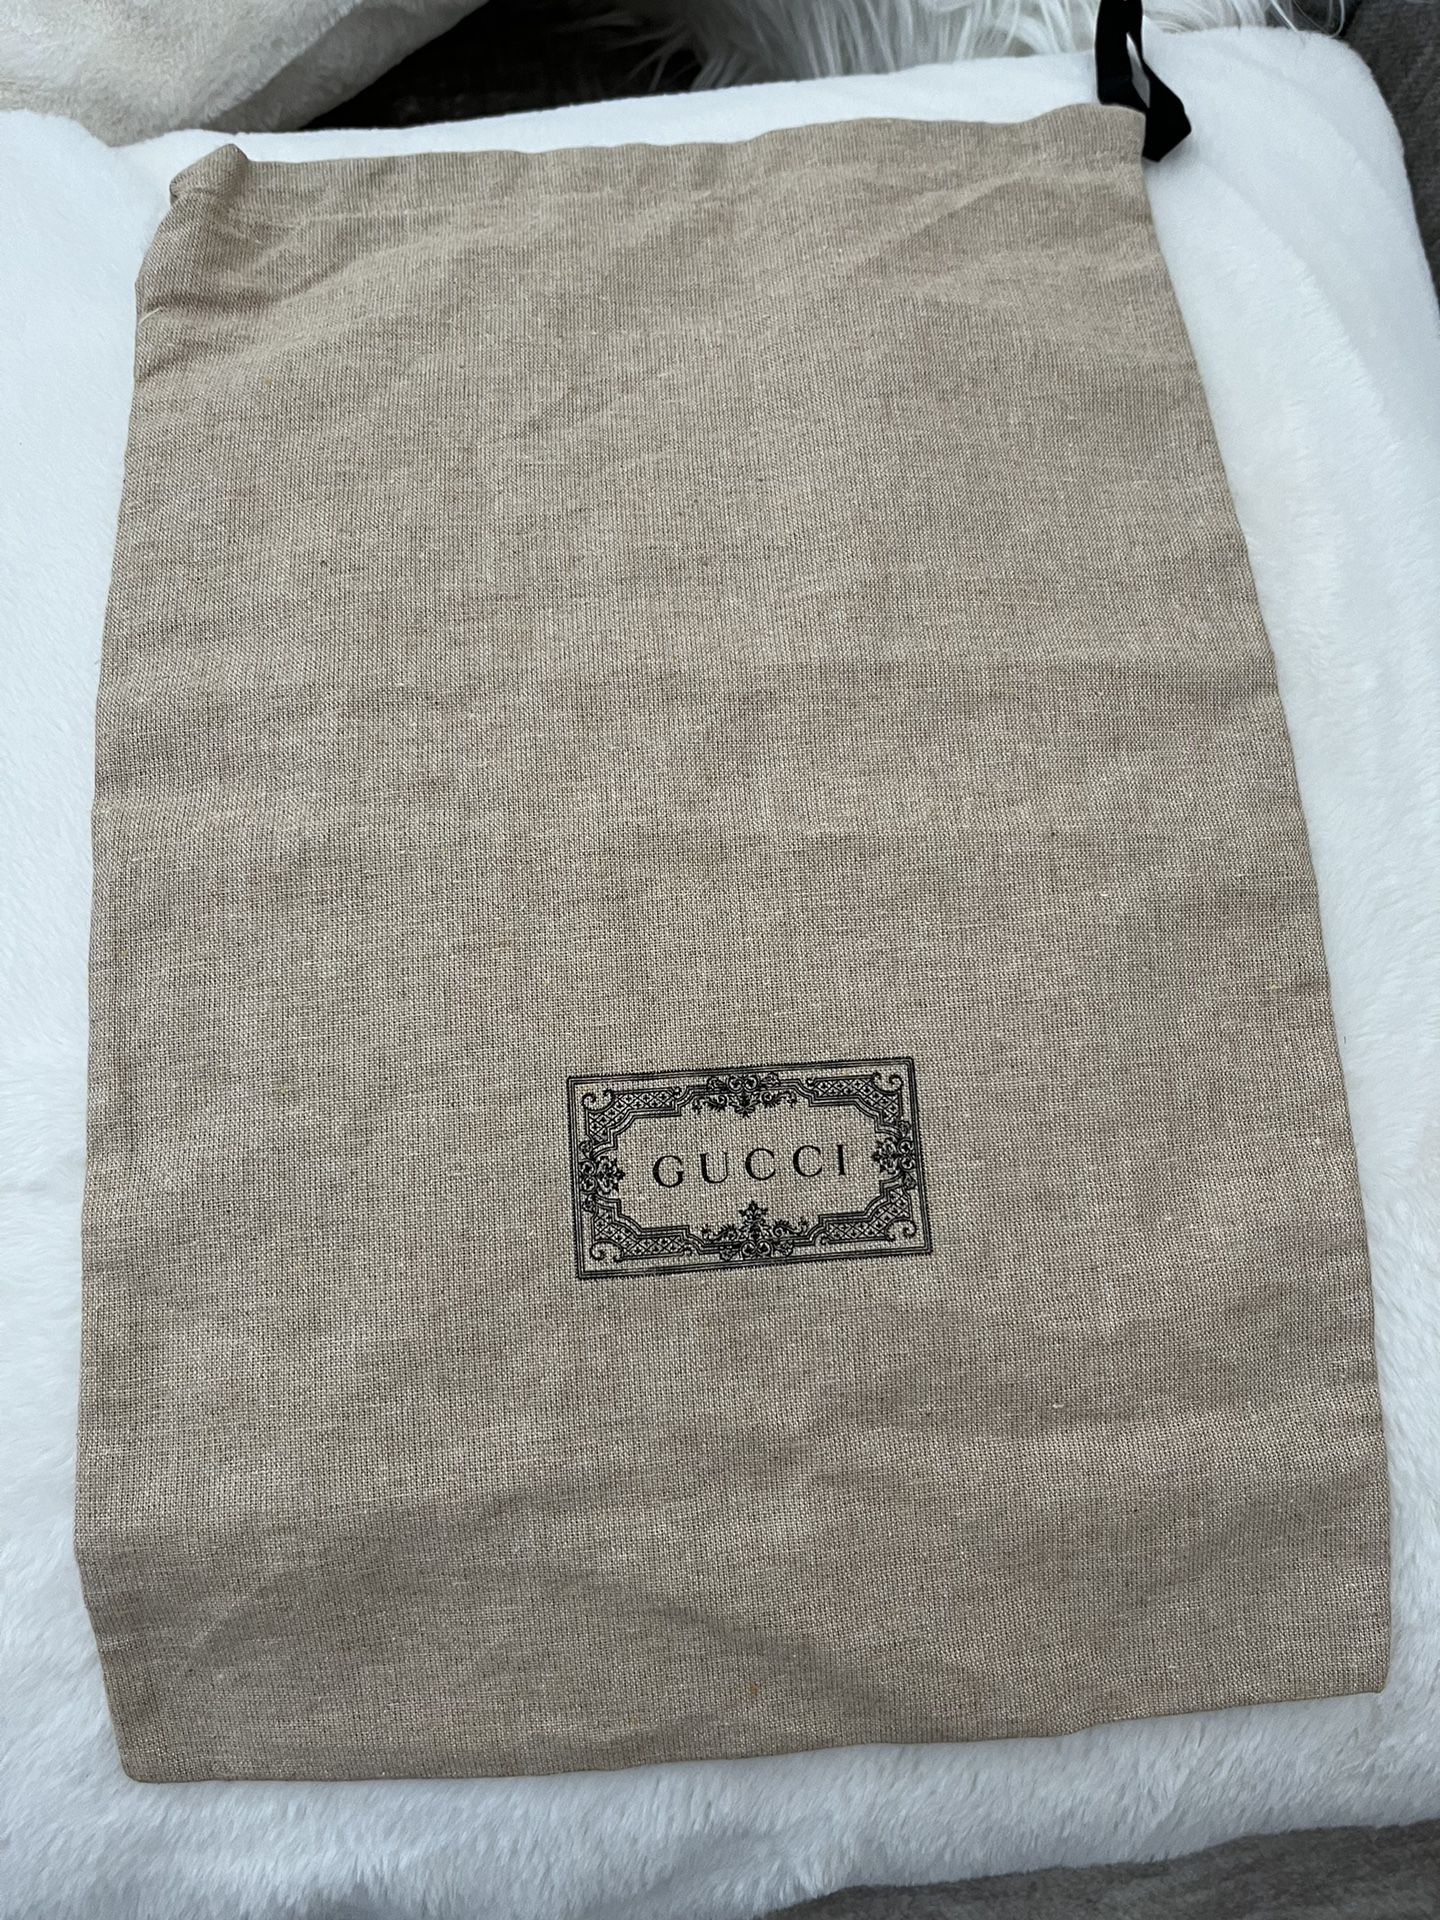 Authentic Gucci Drawstring Large Size Dust Bag 17x11.5 Inches. For Hand Bags New Collection